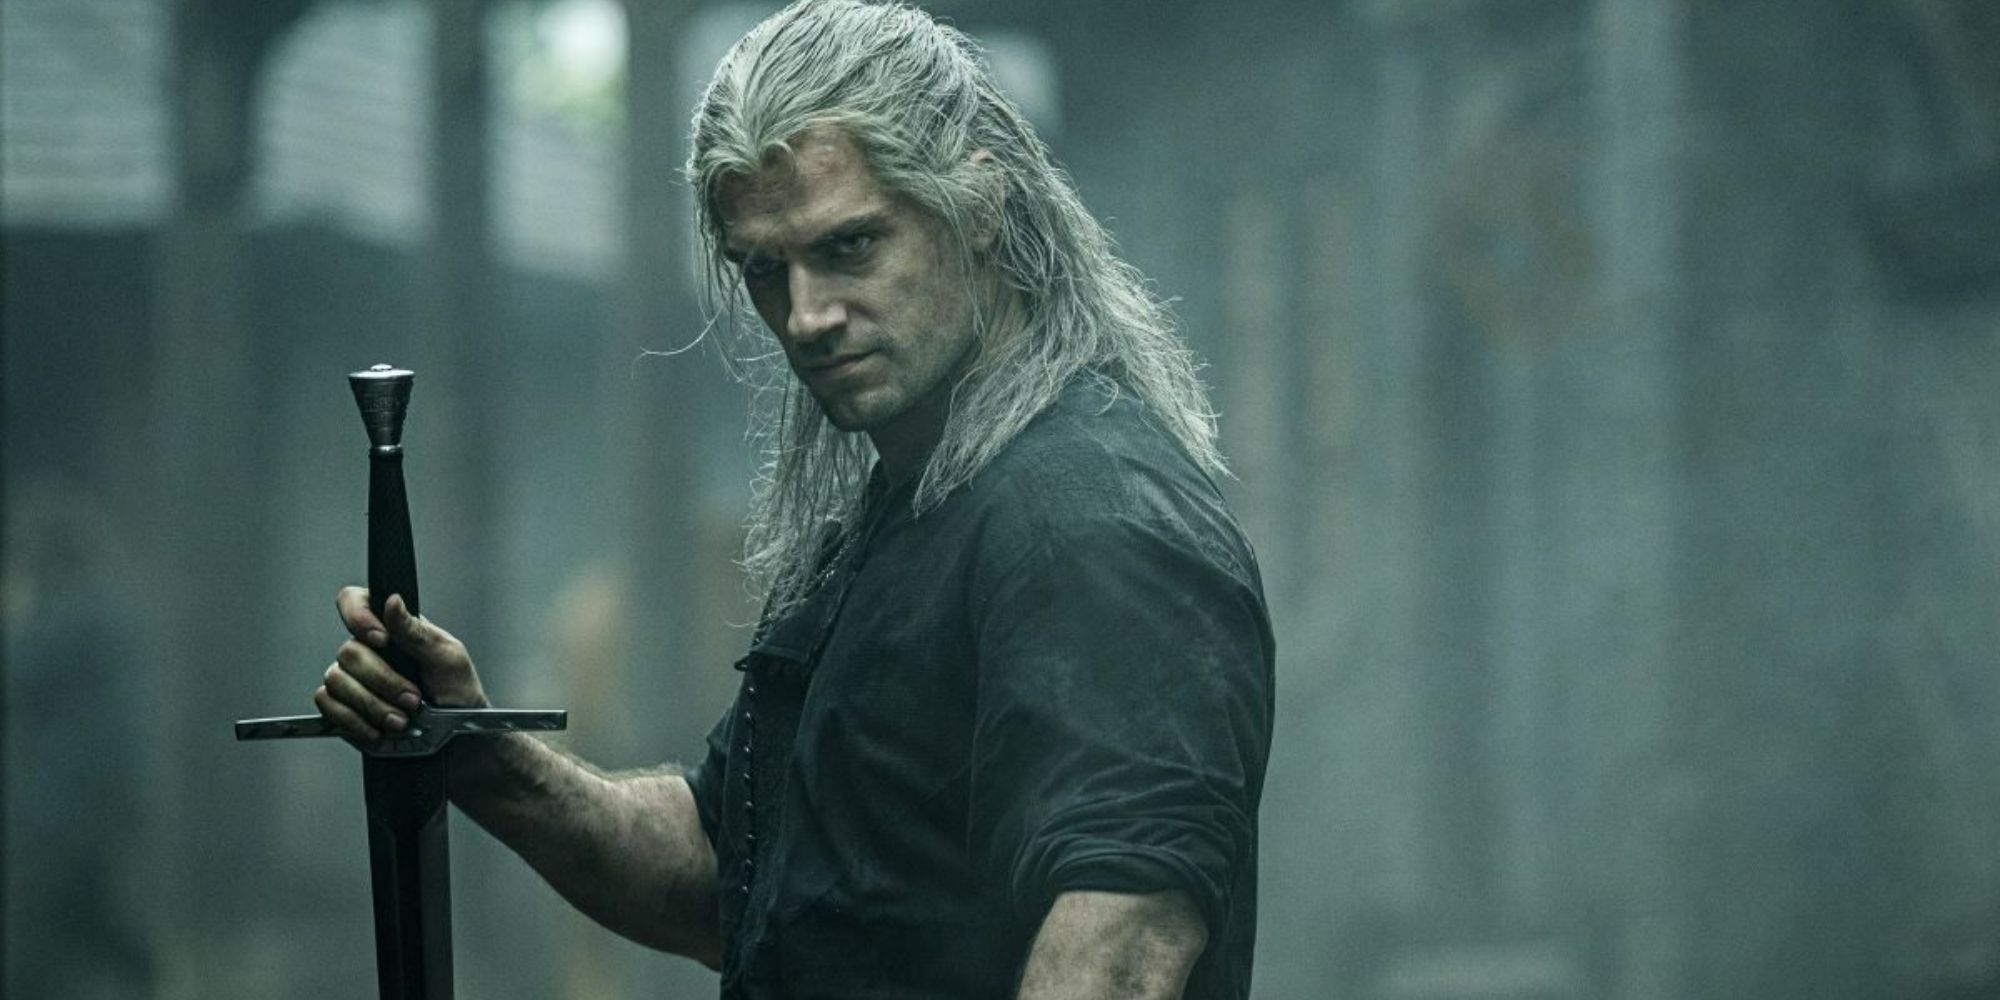 Iconic image of Geralt of Rivia holding a sword in The Witcher